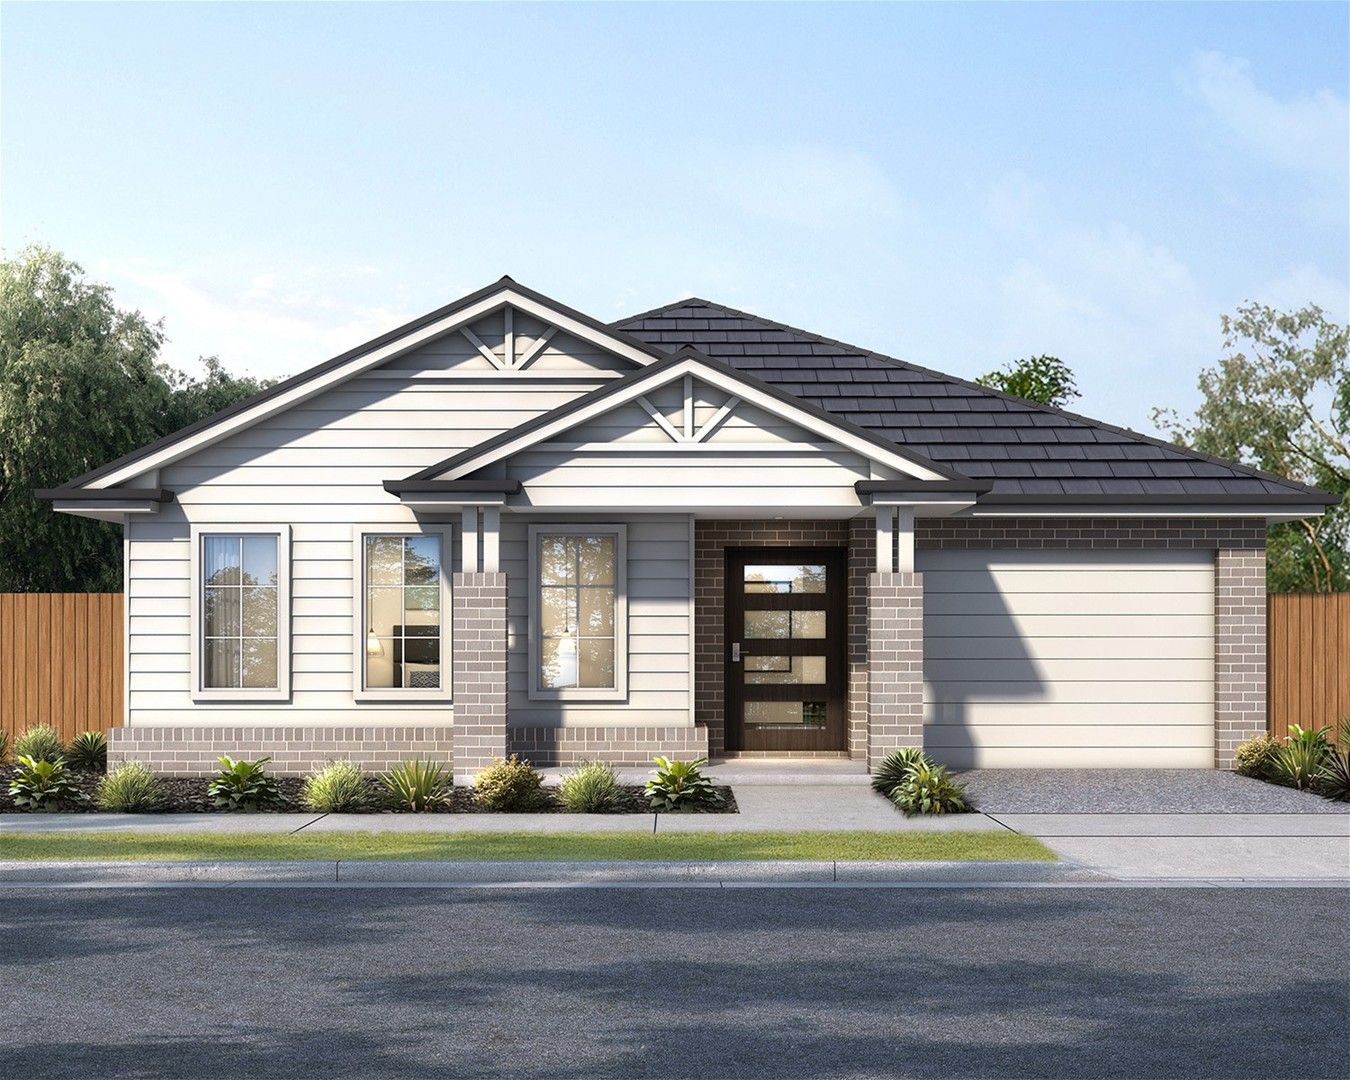 4 bedrooms New House & Land in Lot 9 Proposed Road PRESTONS NSW, 2170